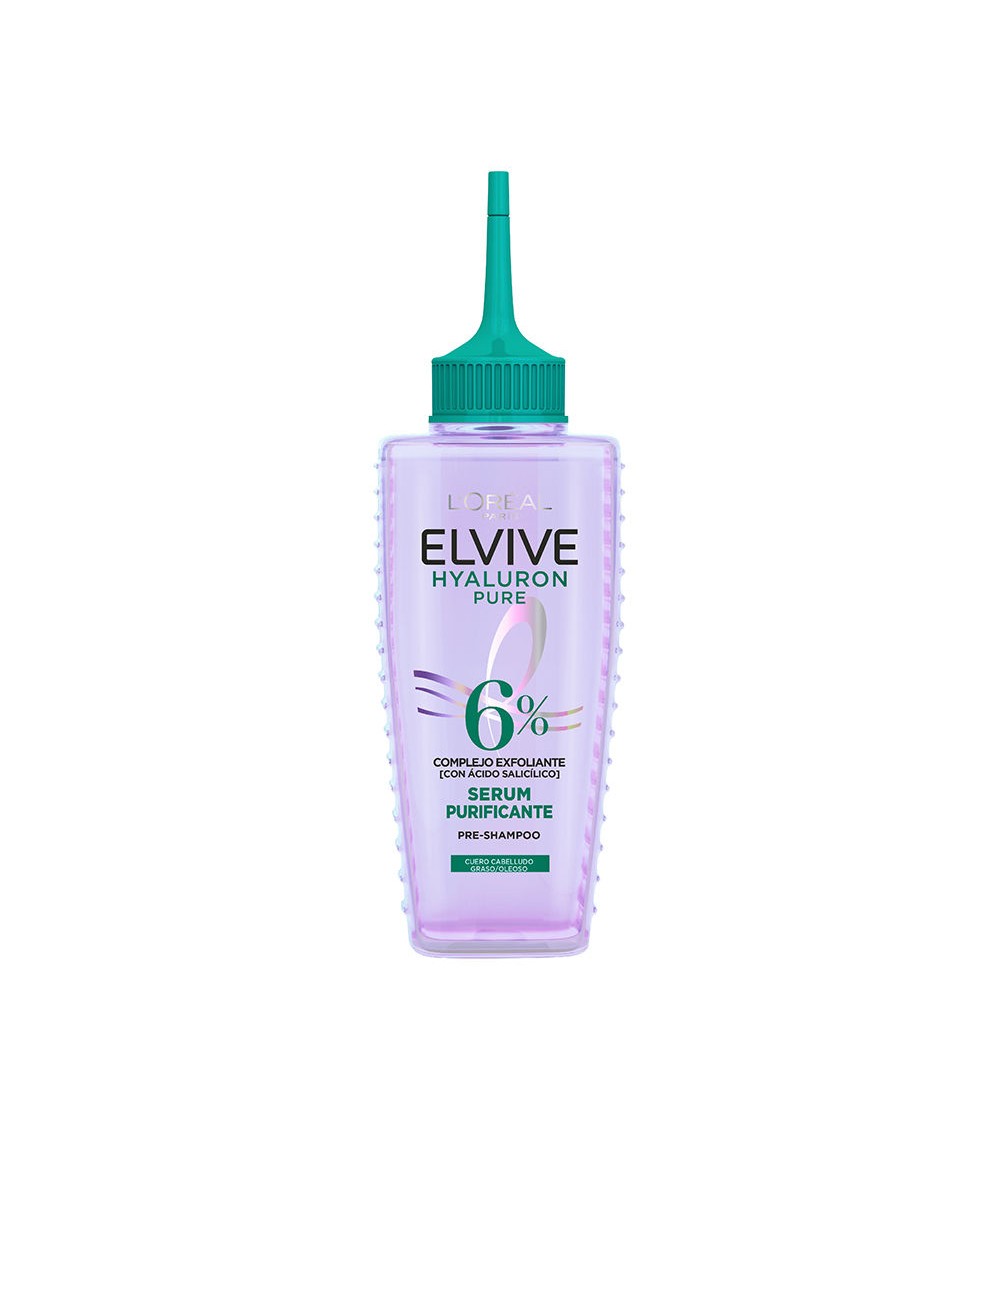 ELVIVE HYALURONIC PURE sérum purifiant 102 ml